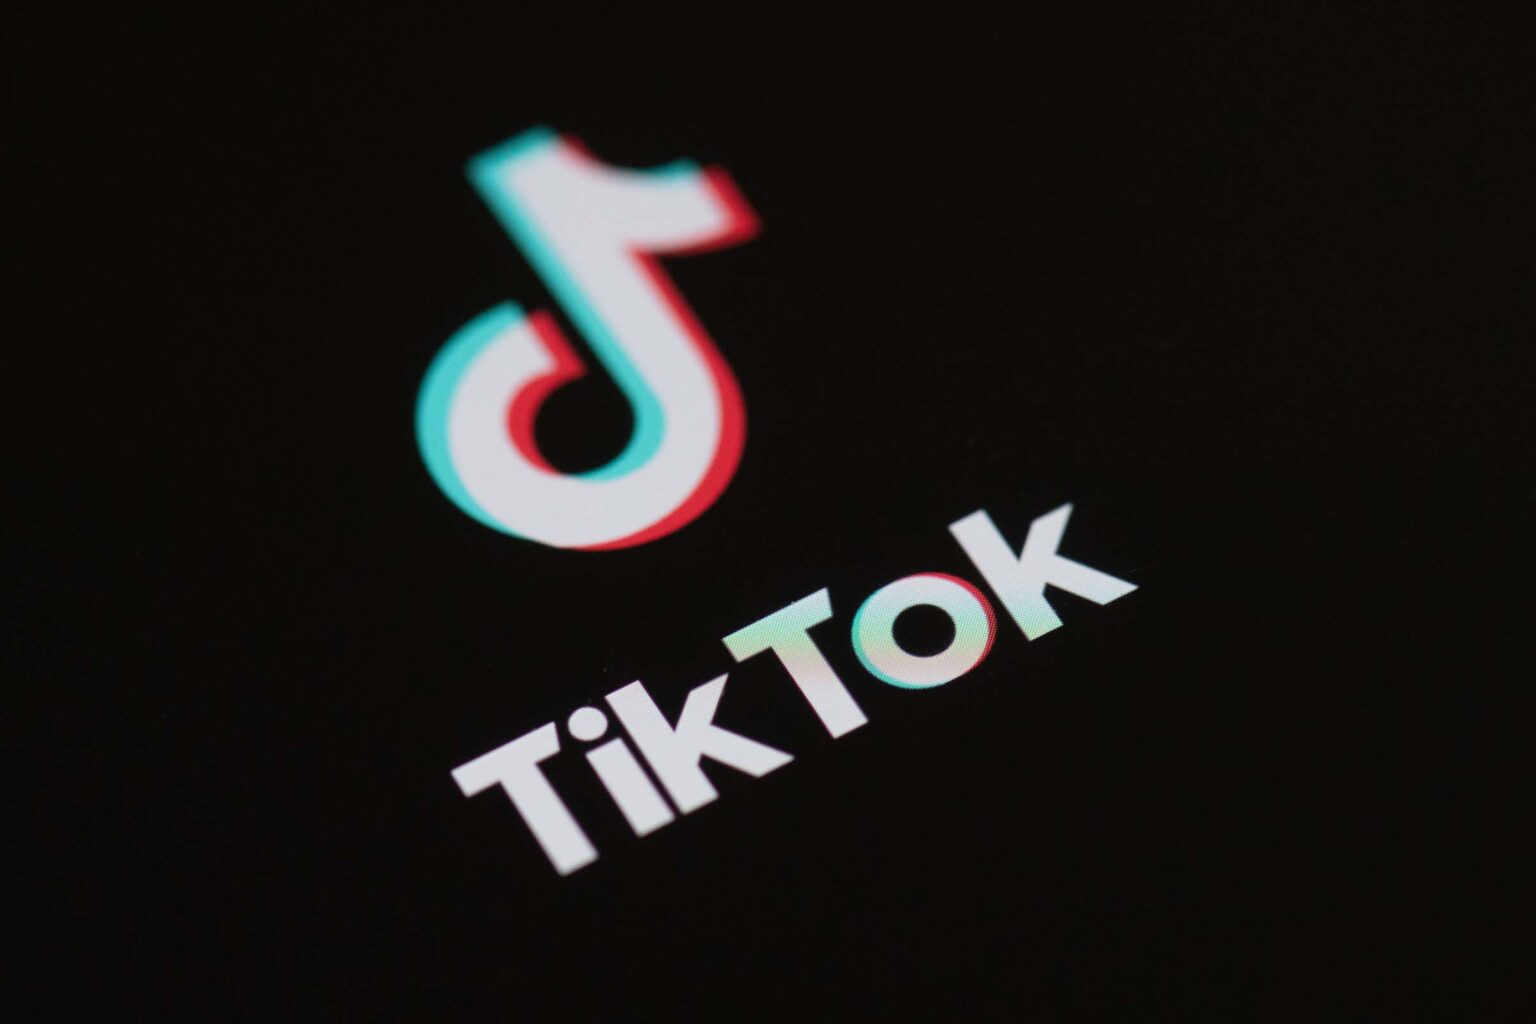 Are you struggling to get on TikTok's For You page? Check out these tips so you can give your channel the best chance of going viral!